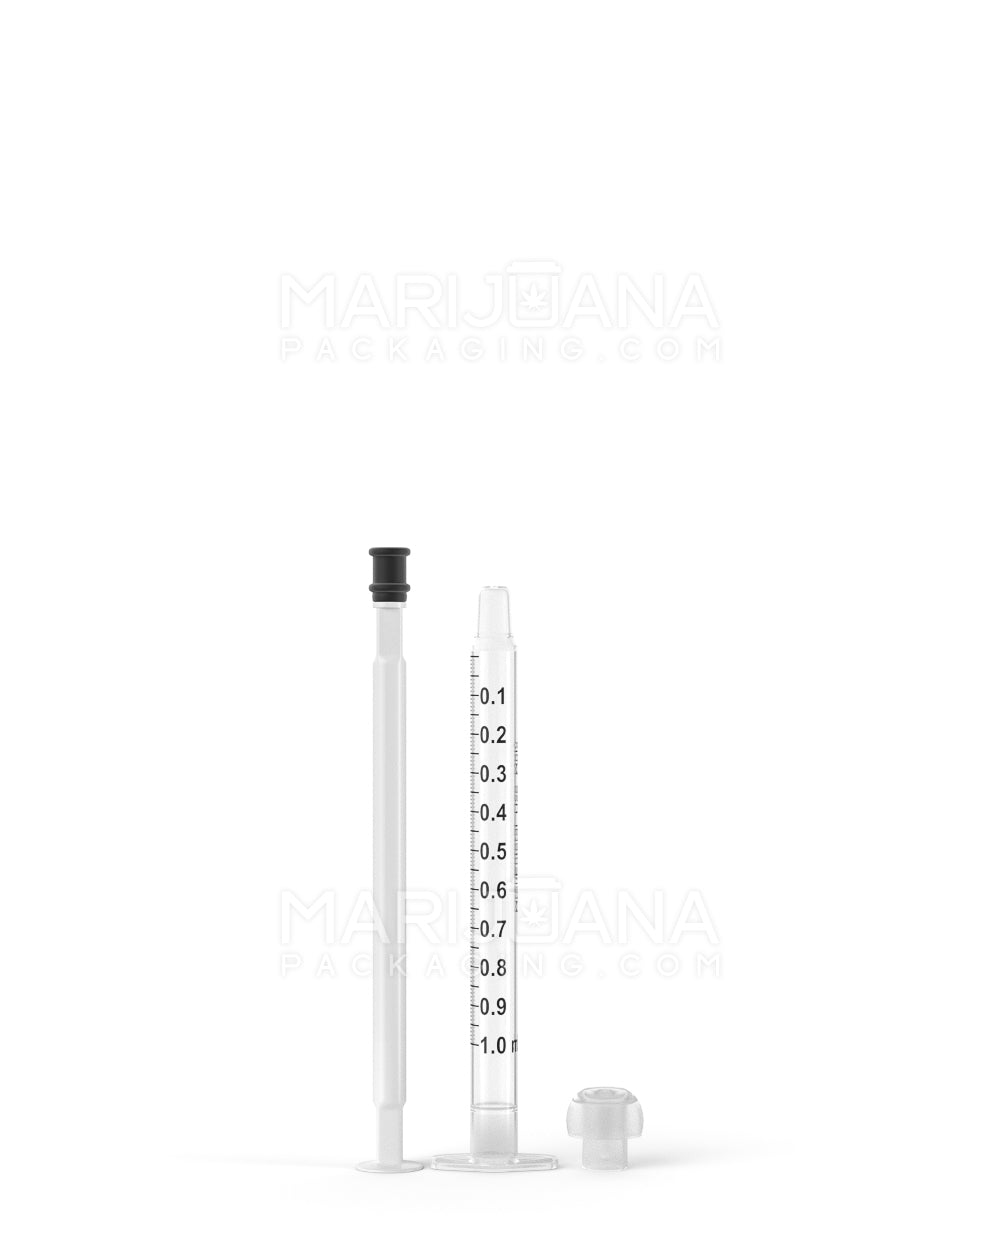 Plastic Oral Concentrate Syringes | 1mL - 0.1mL Increments - 100 Count - 3